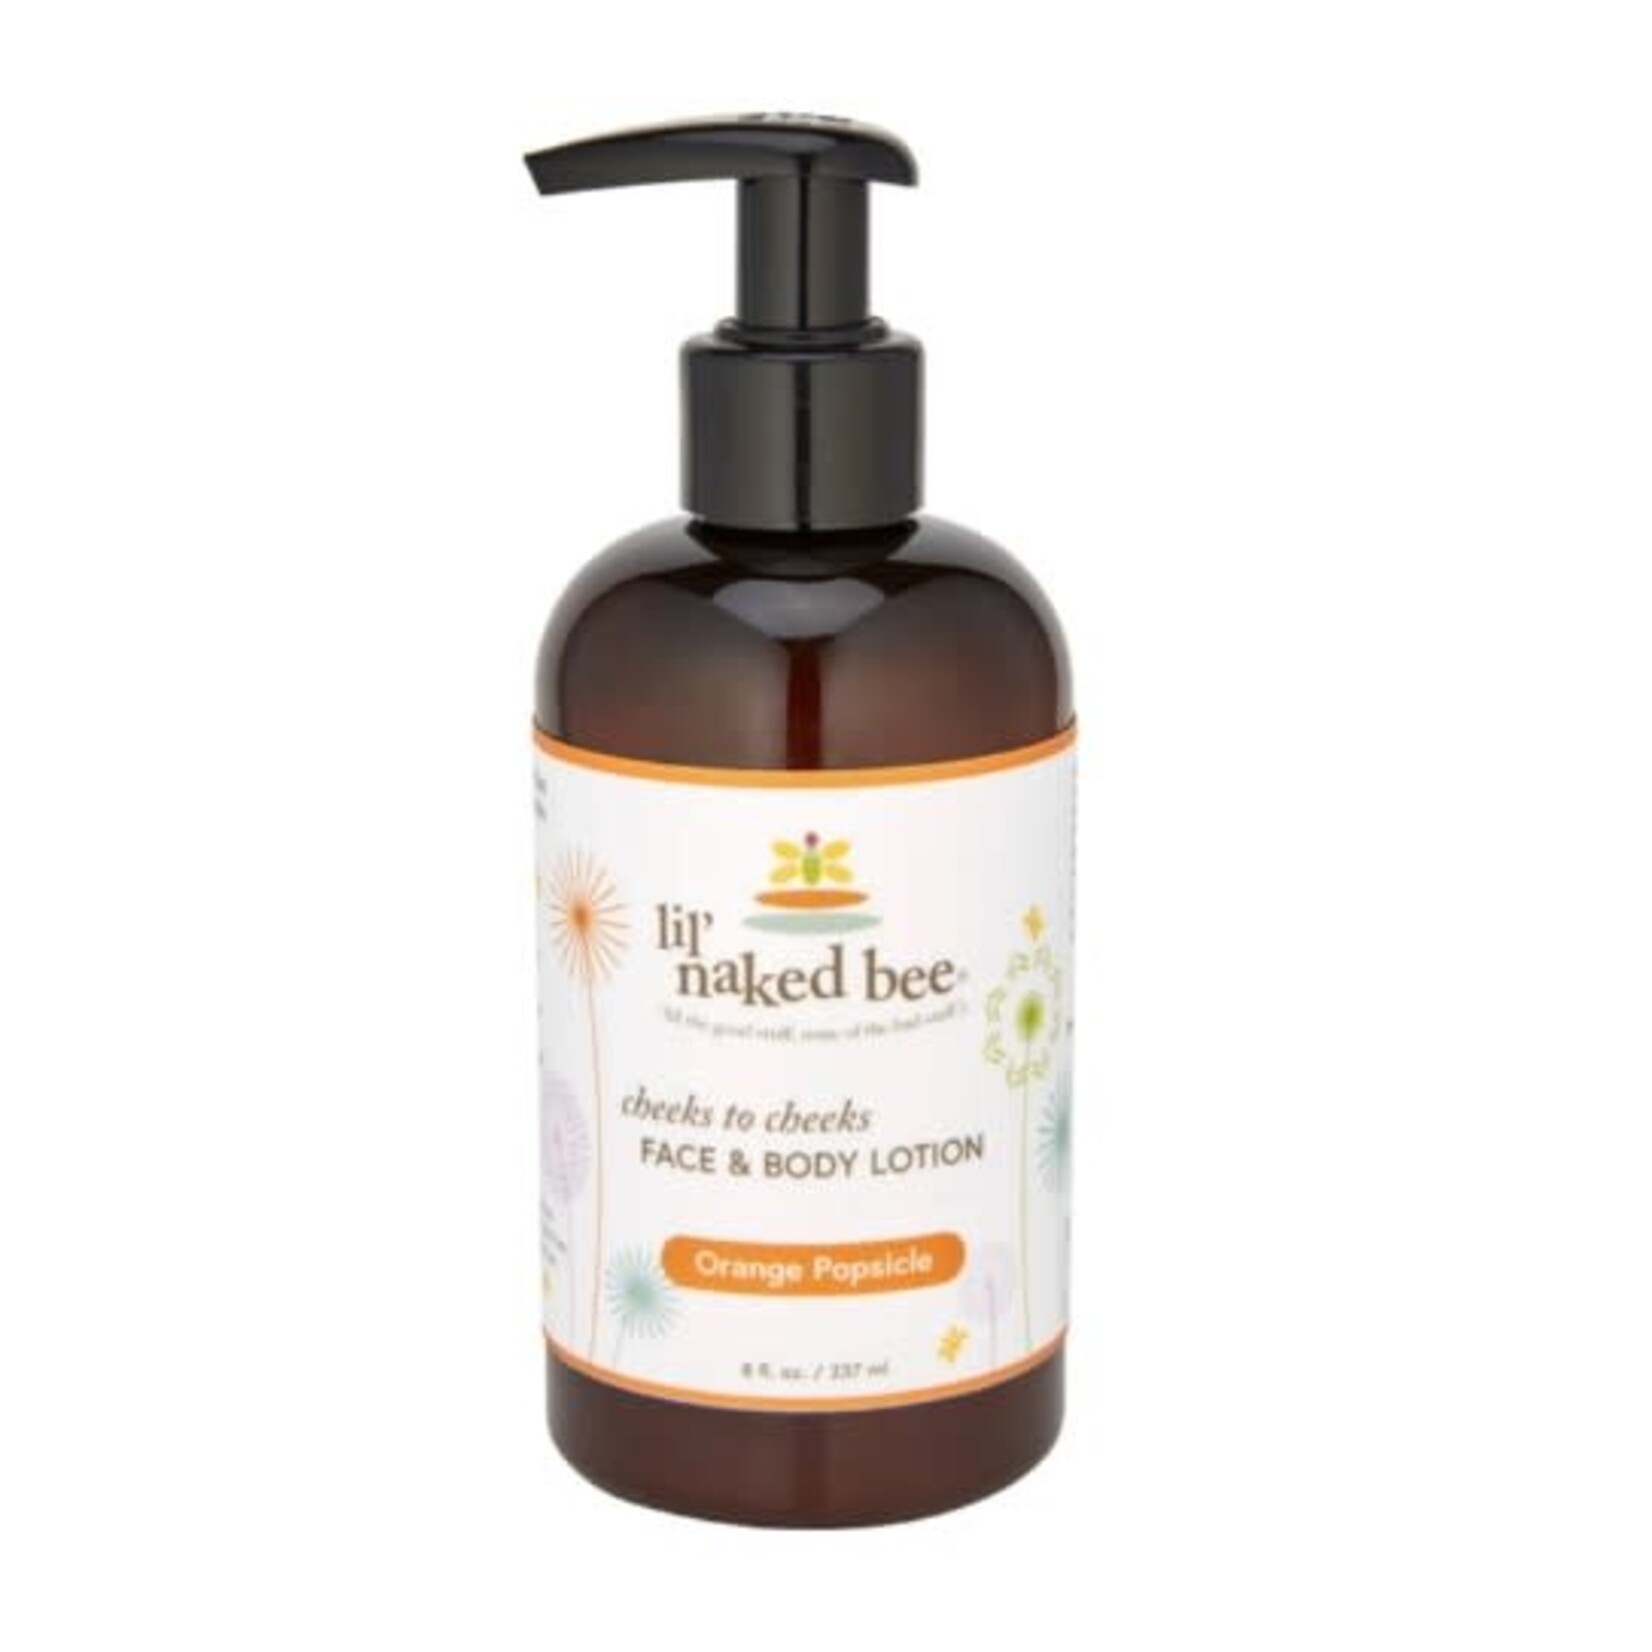 The Naked Bee Lil' Naked Bee Face & Body Lotion Orange Popsicle